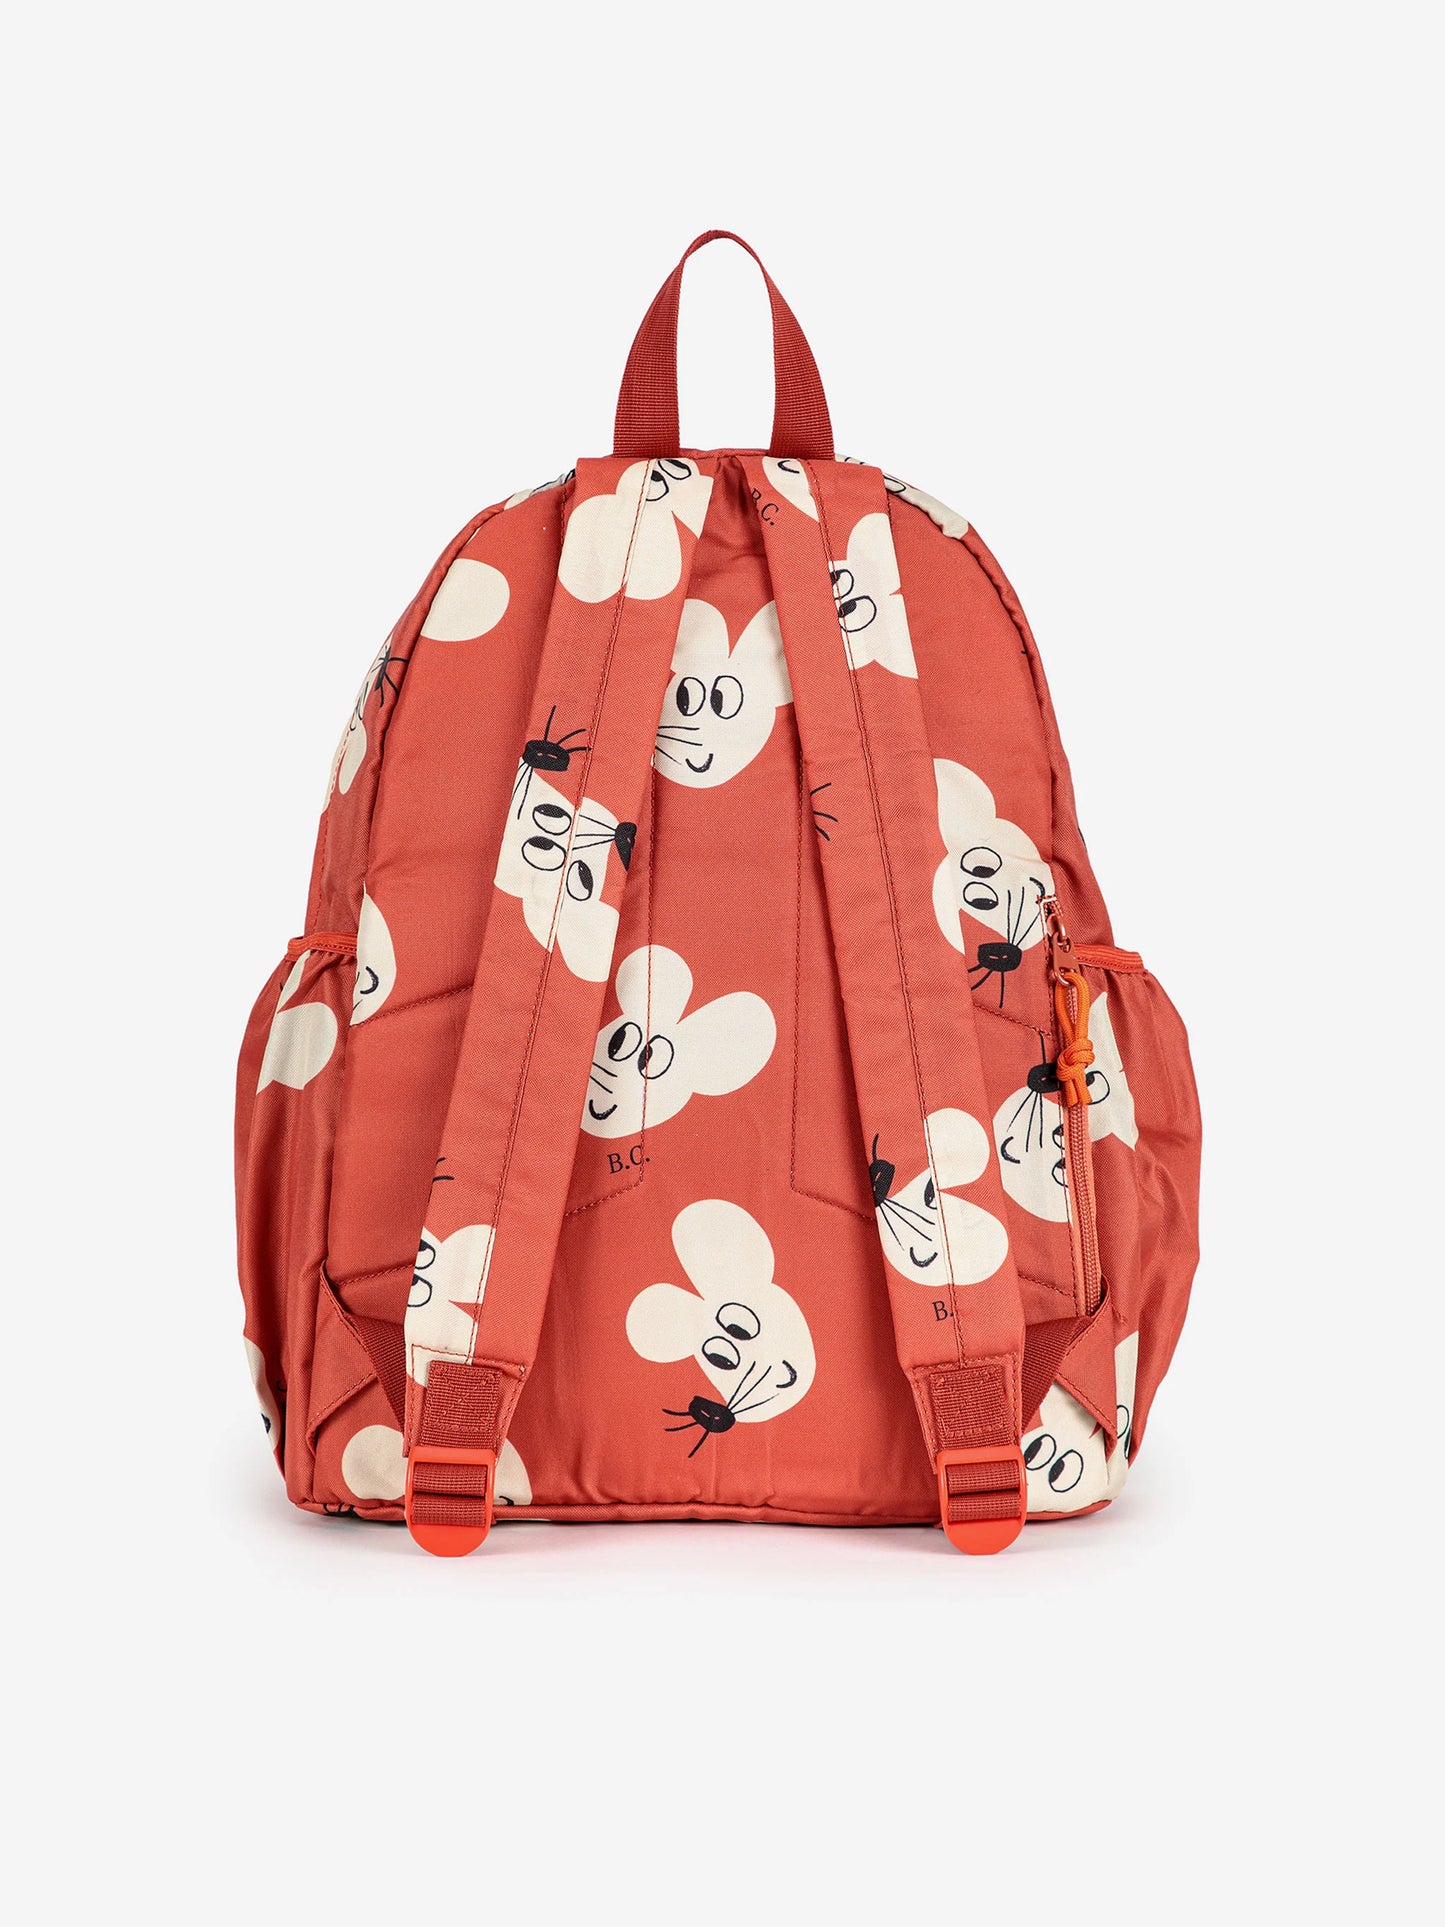 Bobo Chosesn Mouse All Over Backpack